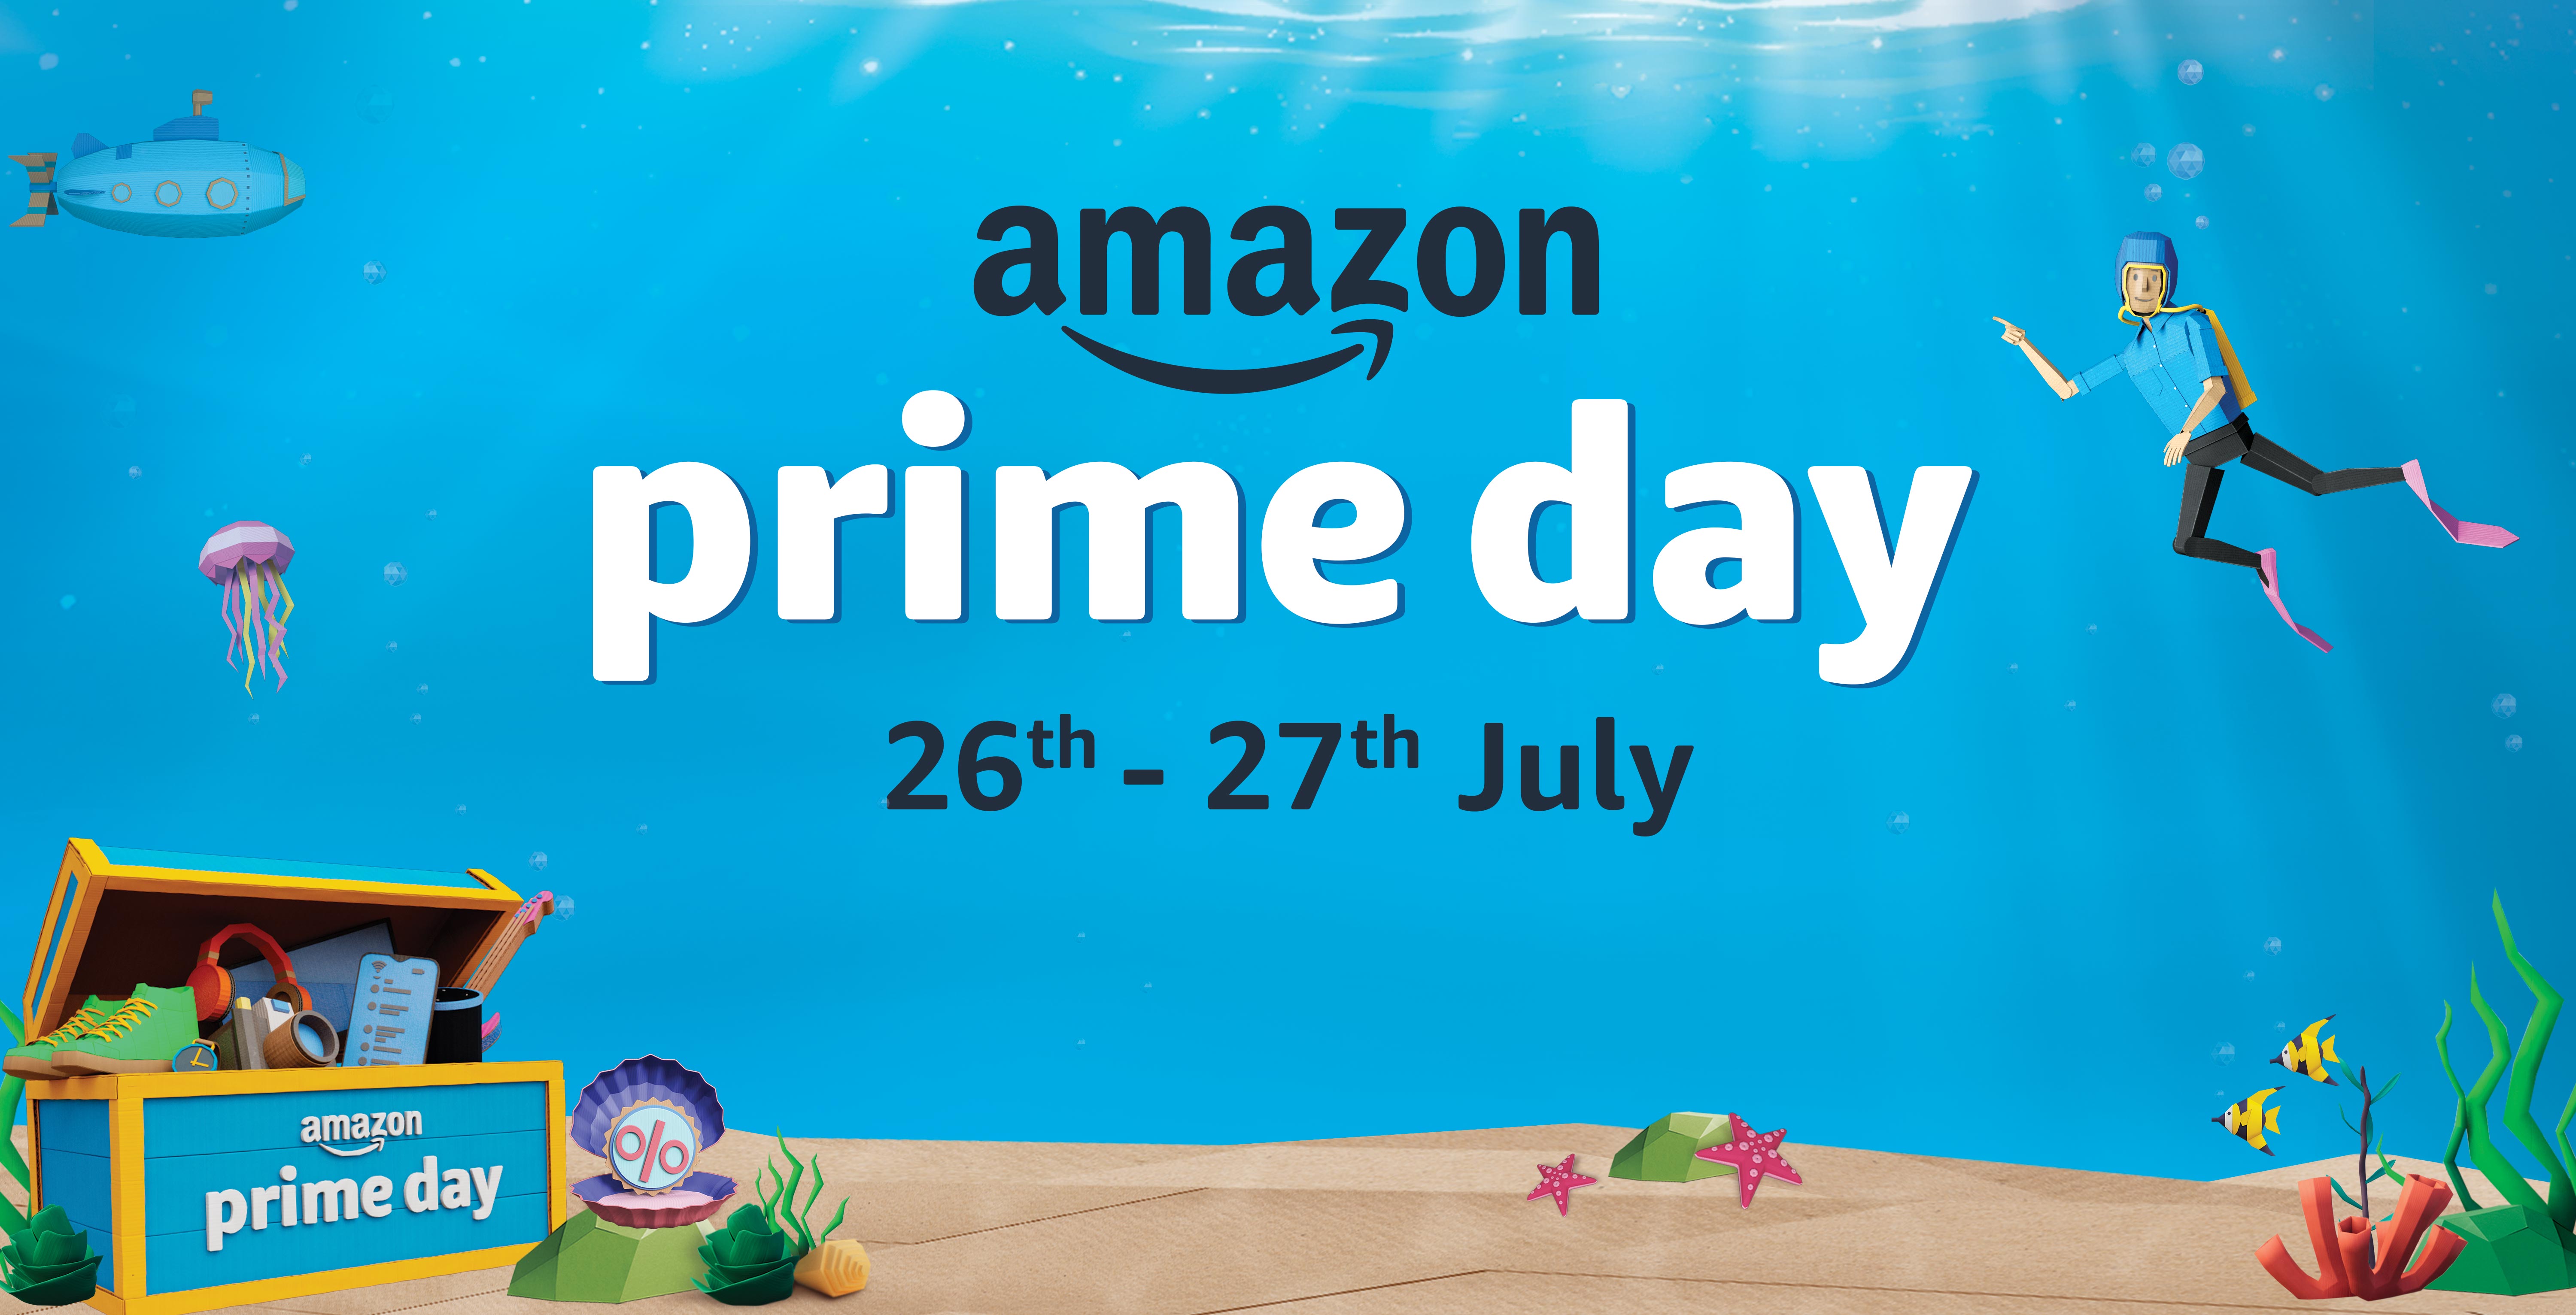 Prime Day 2021 Arrives in India on July 26 & 27;  Discover Joy with Two Days of Savings, Great Deals, New Launches from Top Brands & Small and Medium Businesses, Blockbuster Entertainment and More